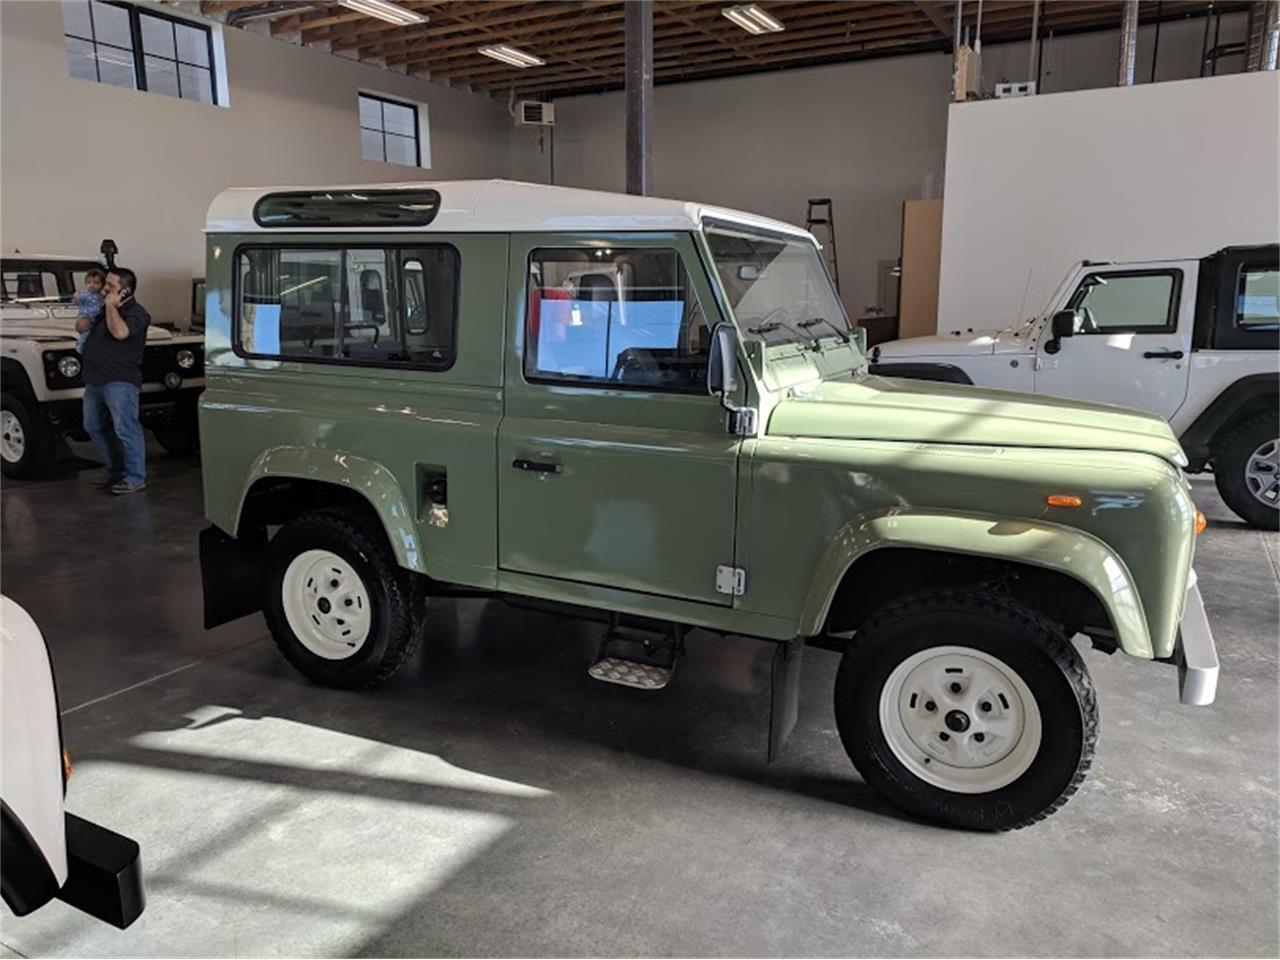 For Sale at Auction: 1989 Land Rover Defender for sale in Billings, MT